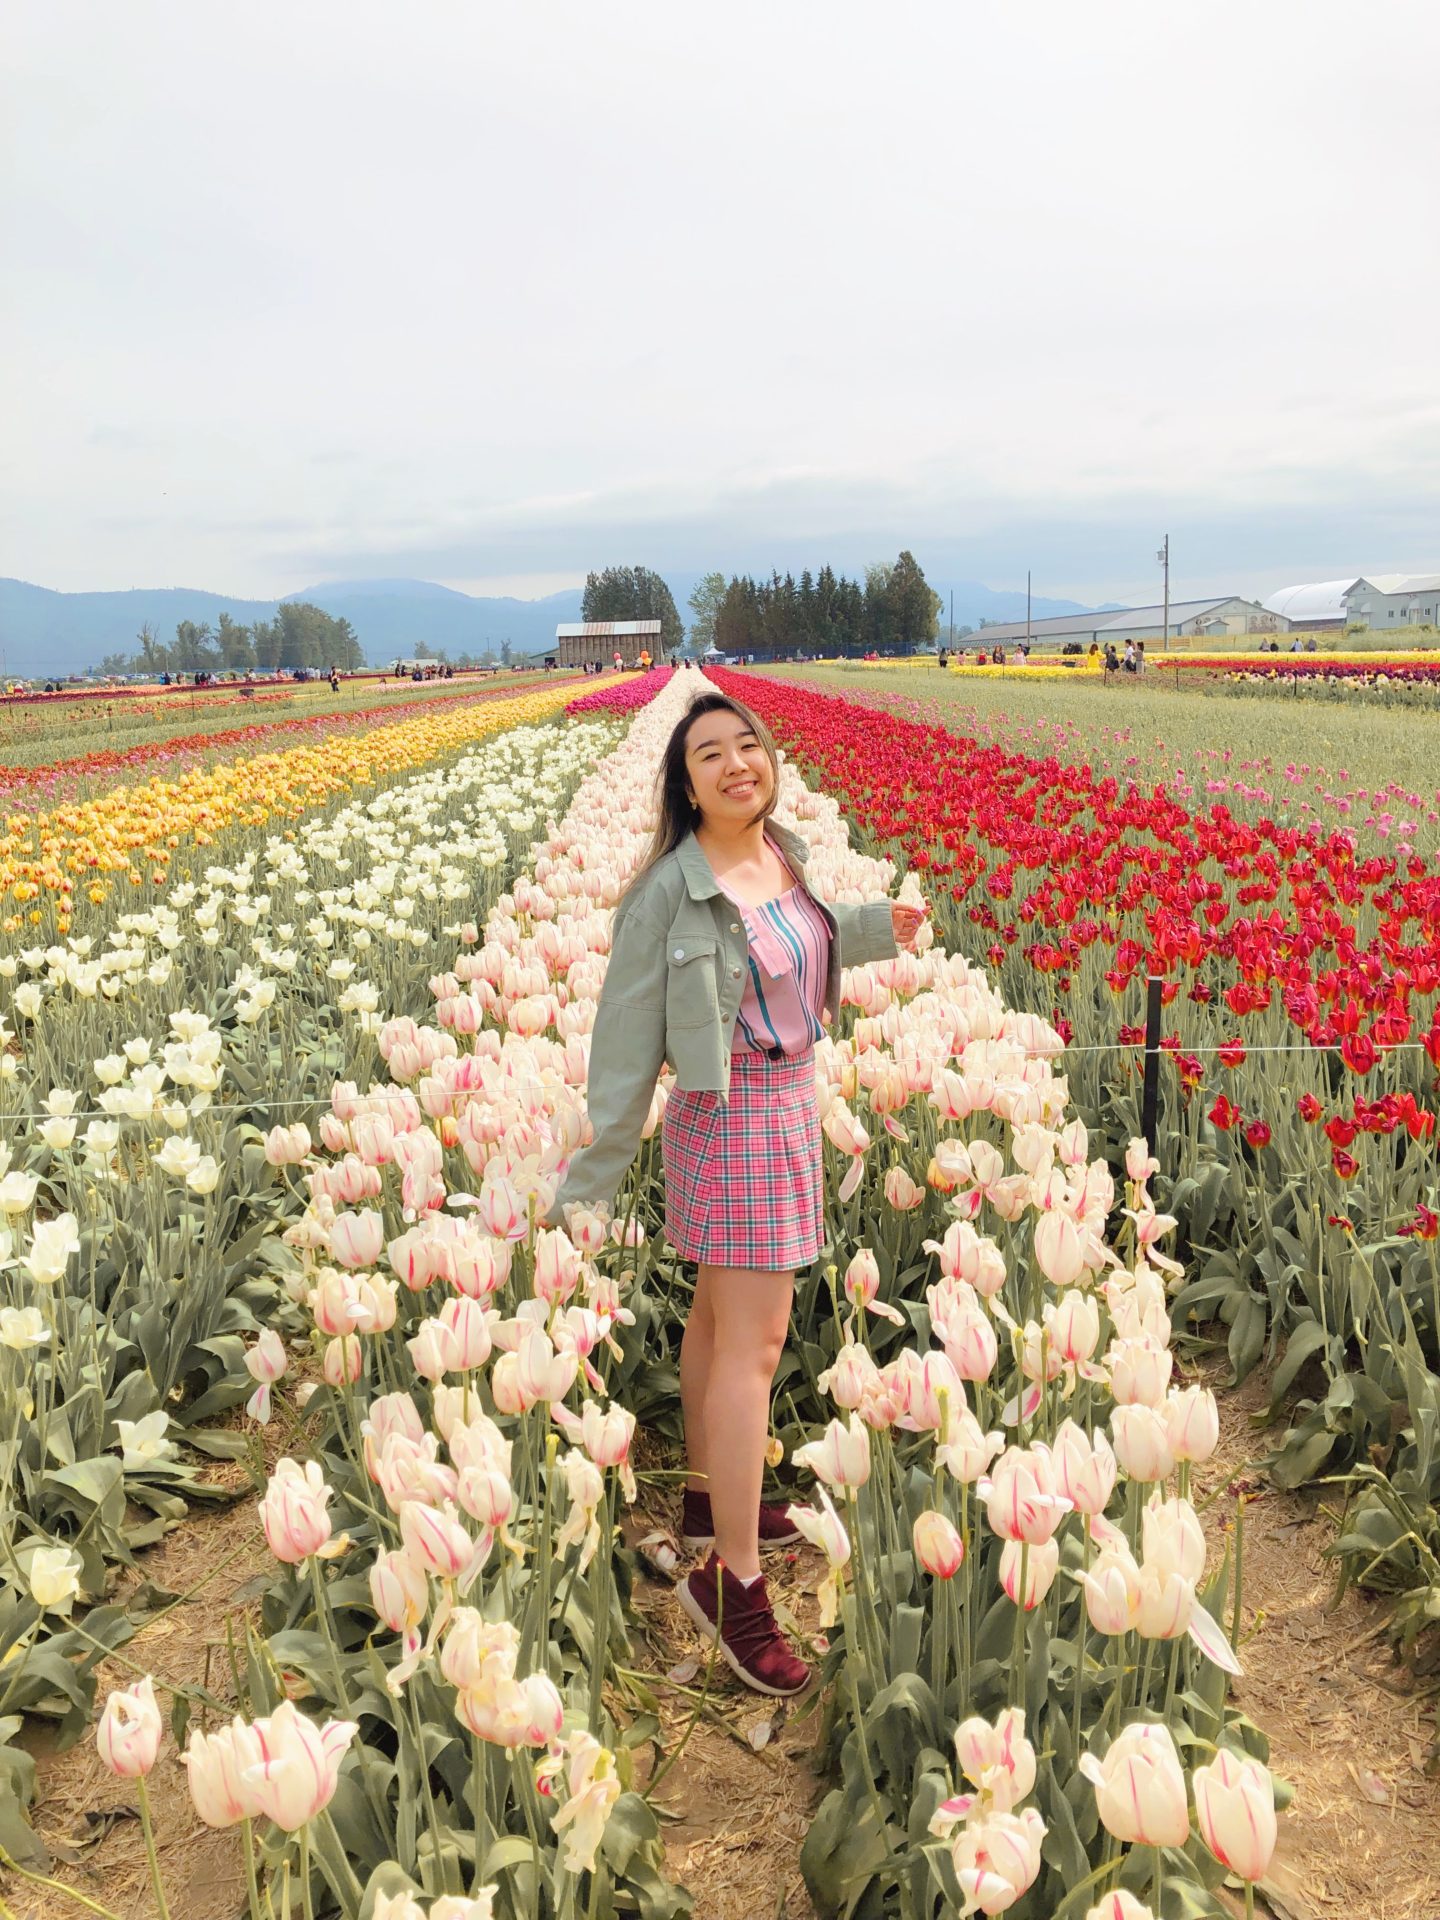 Smiling my way through my 27th birthday in the tulip fields 